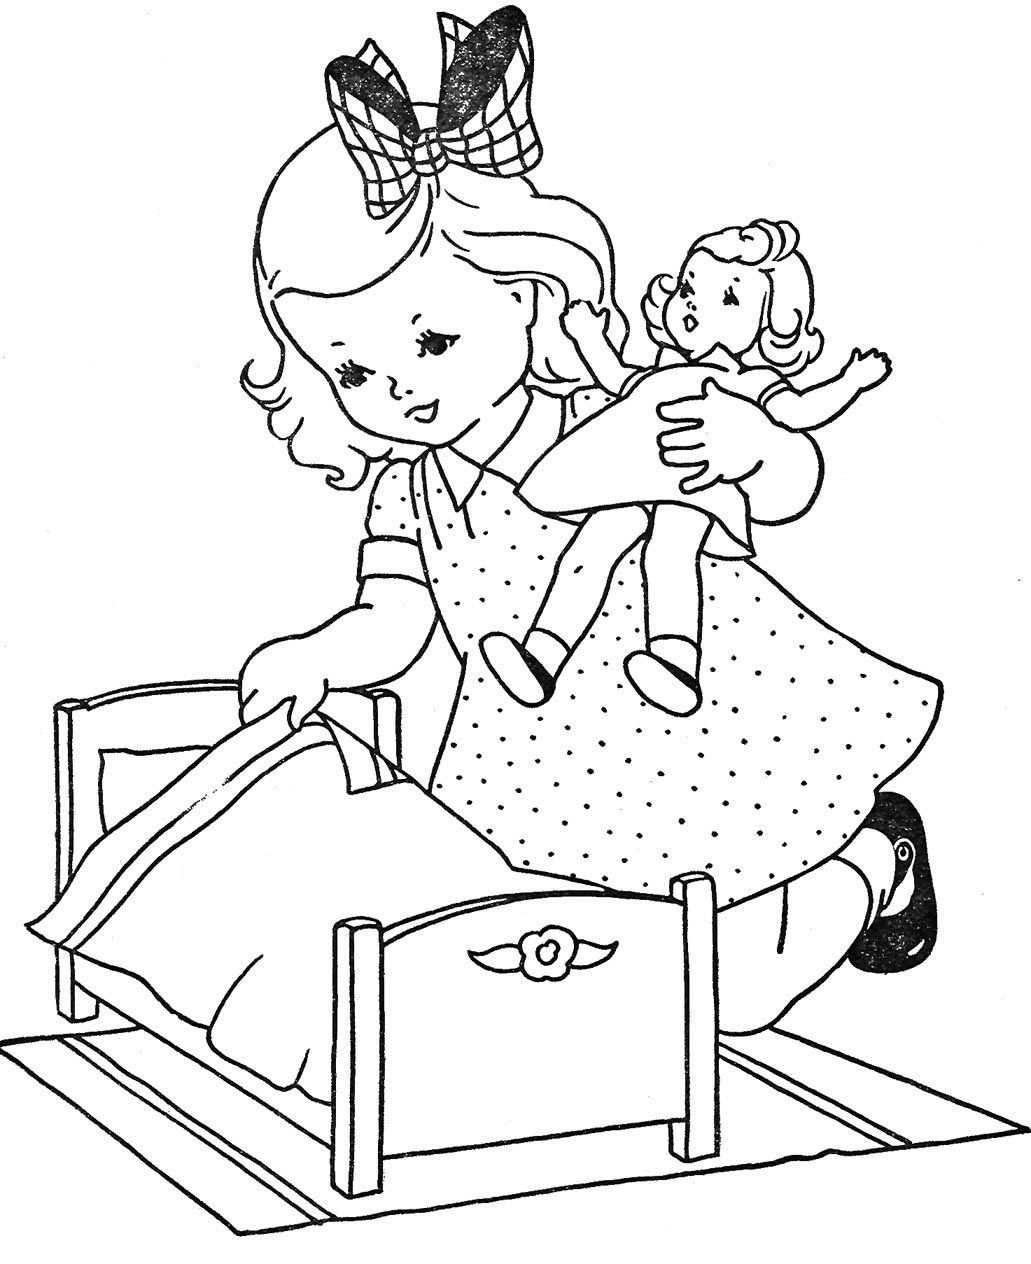 Download Doll Coloring Pages - Best Coloring Pages For Kids